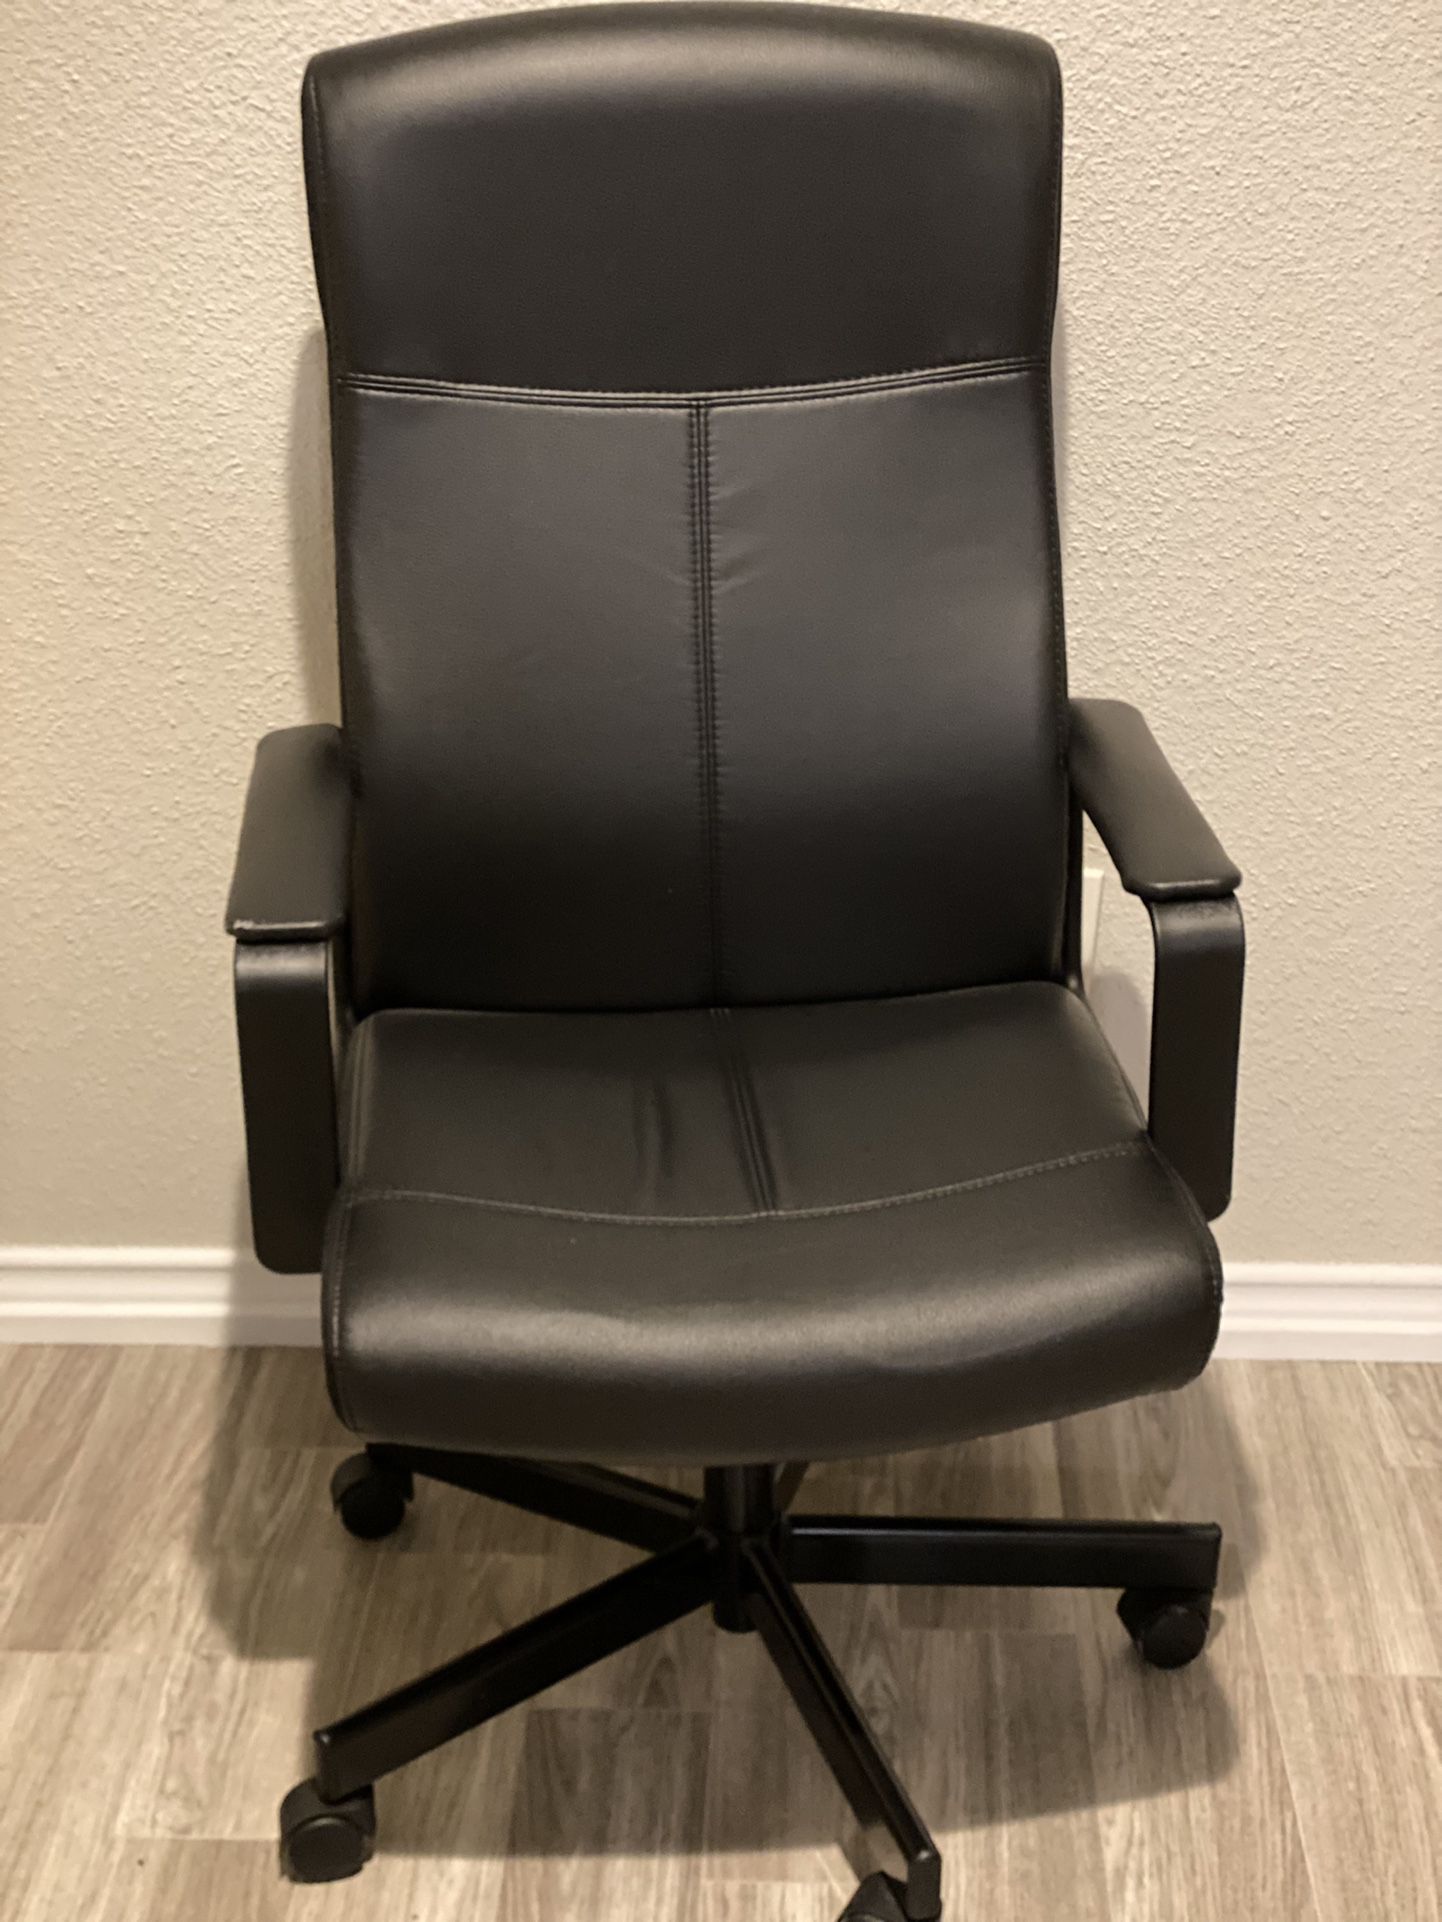 Office Chair With Adjustable Tilt Tension And Built In Lumbar Support